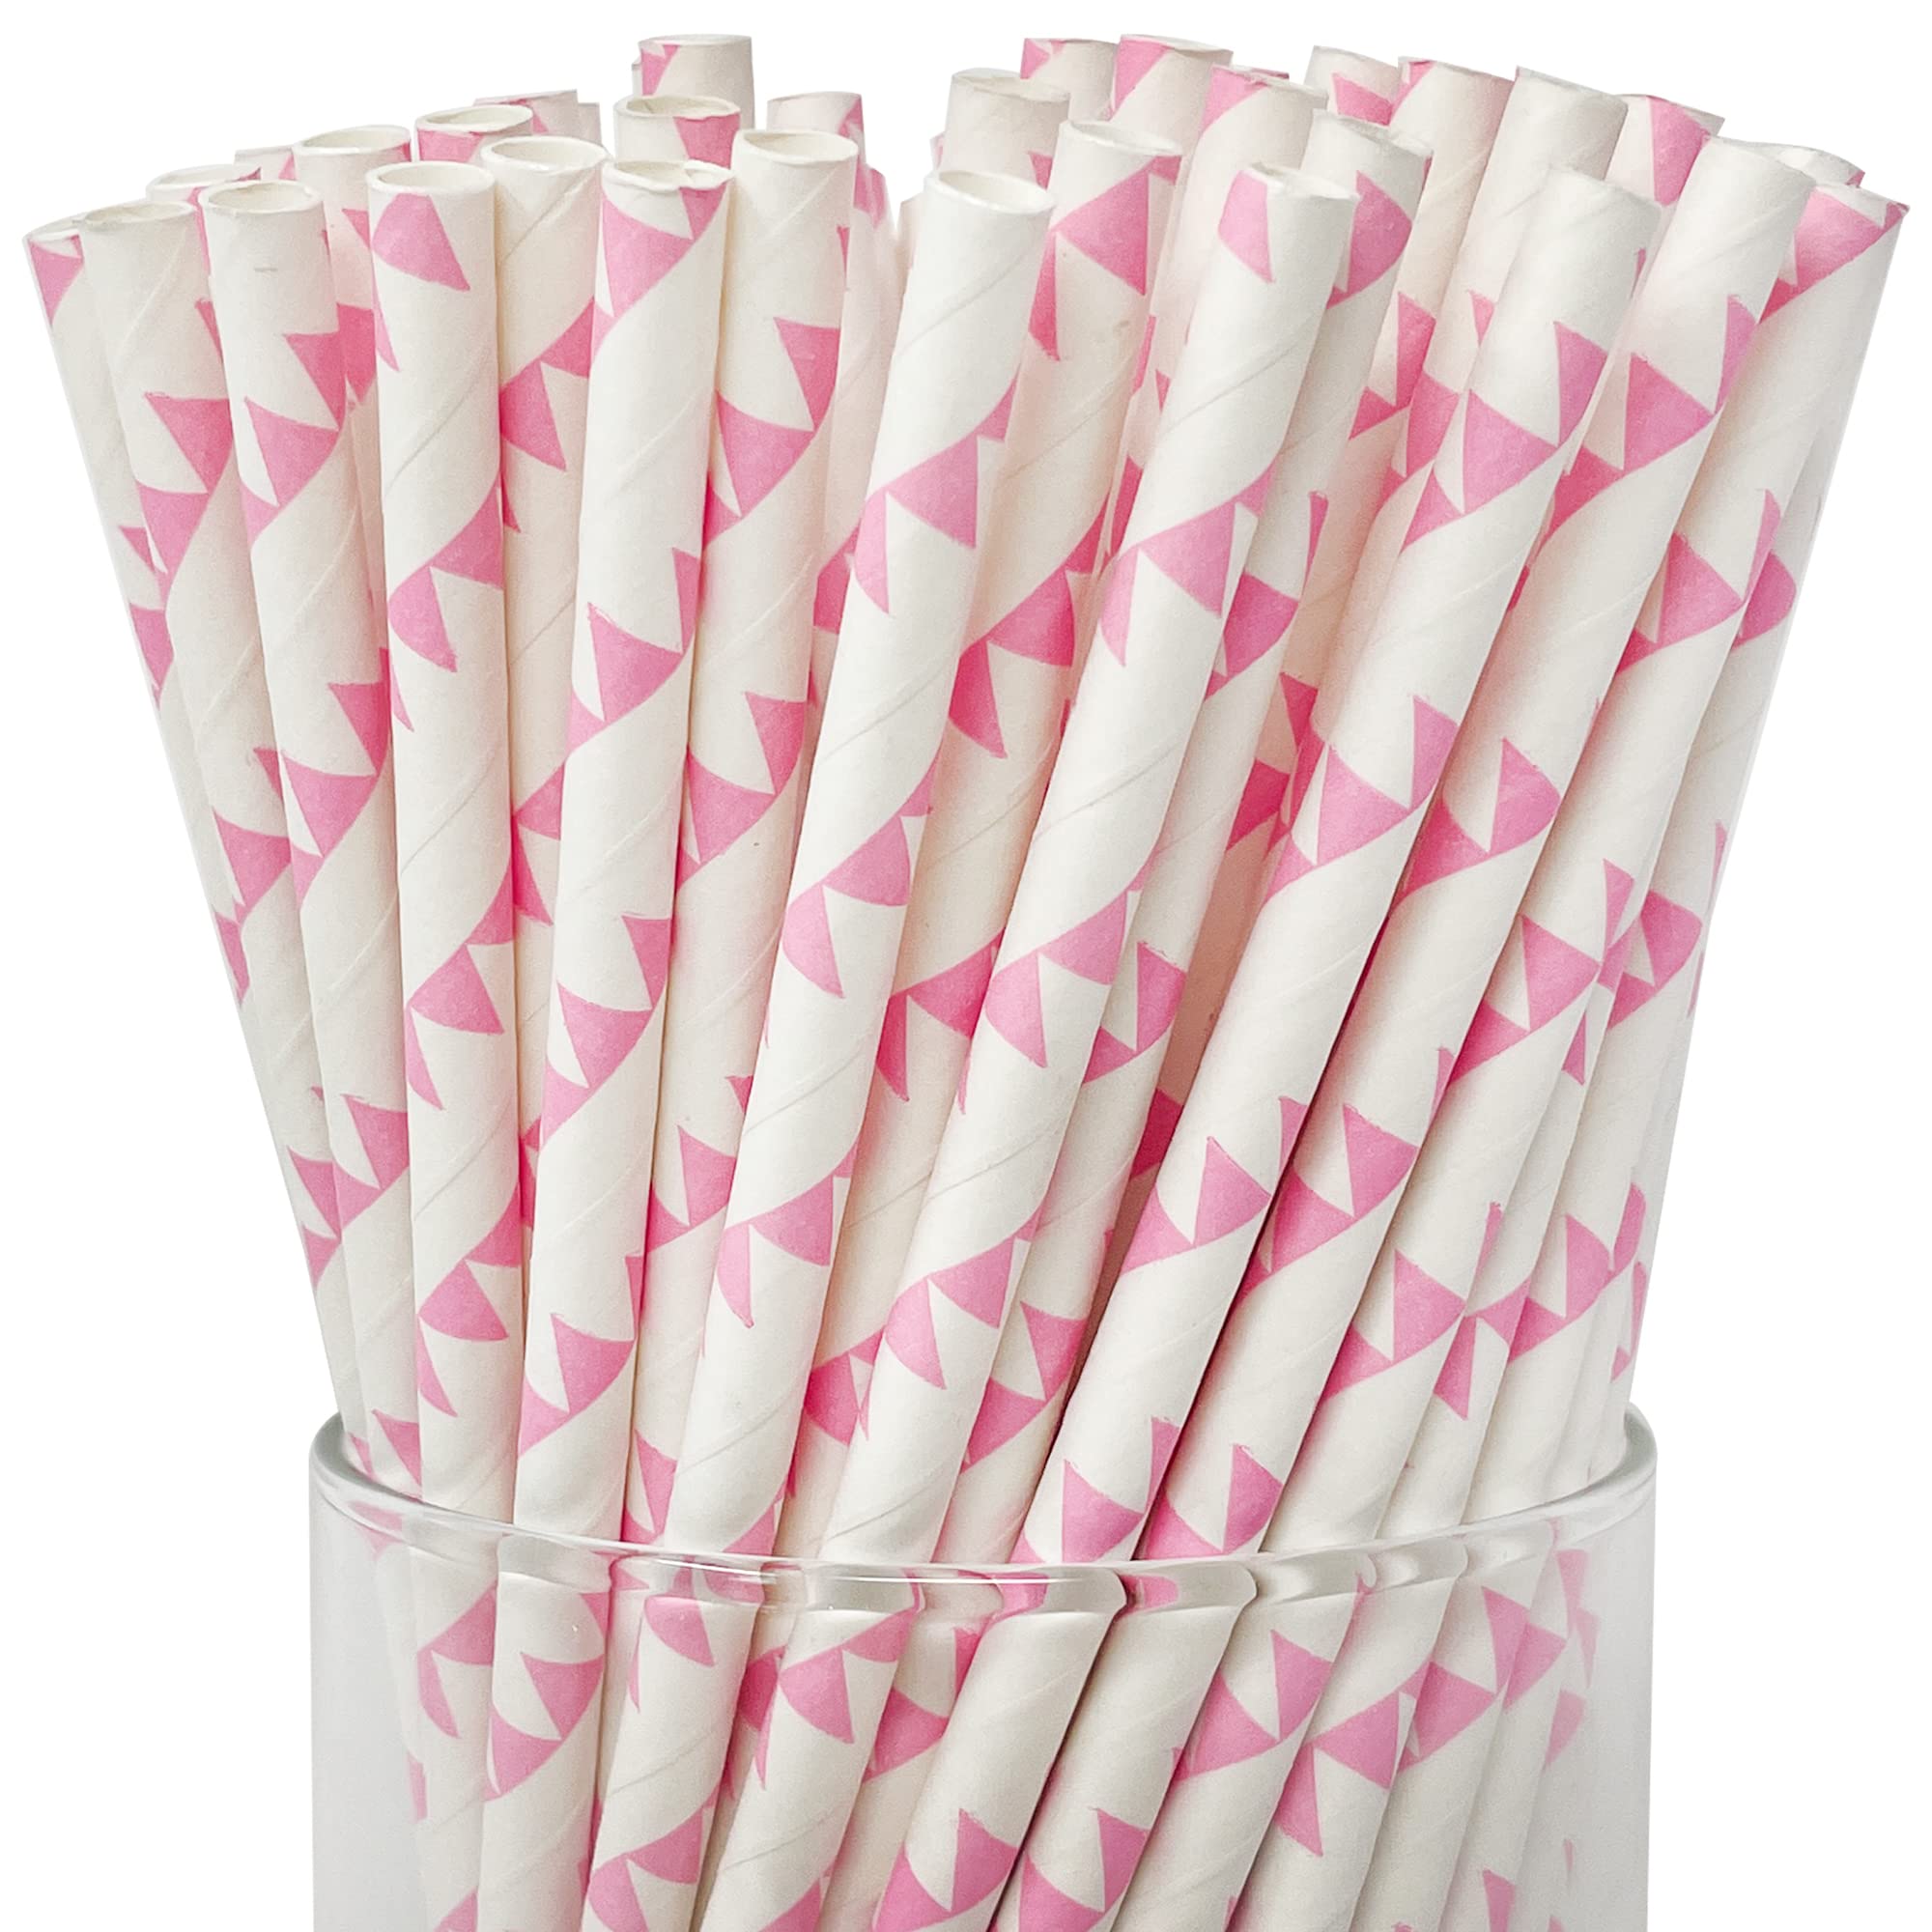 Pennant Banner Straws - 6 Color Options